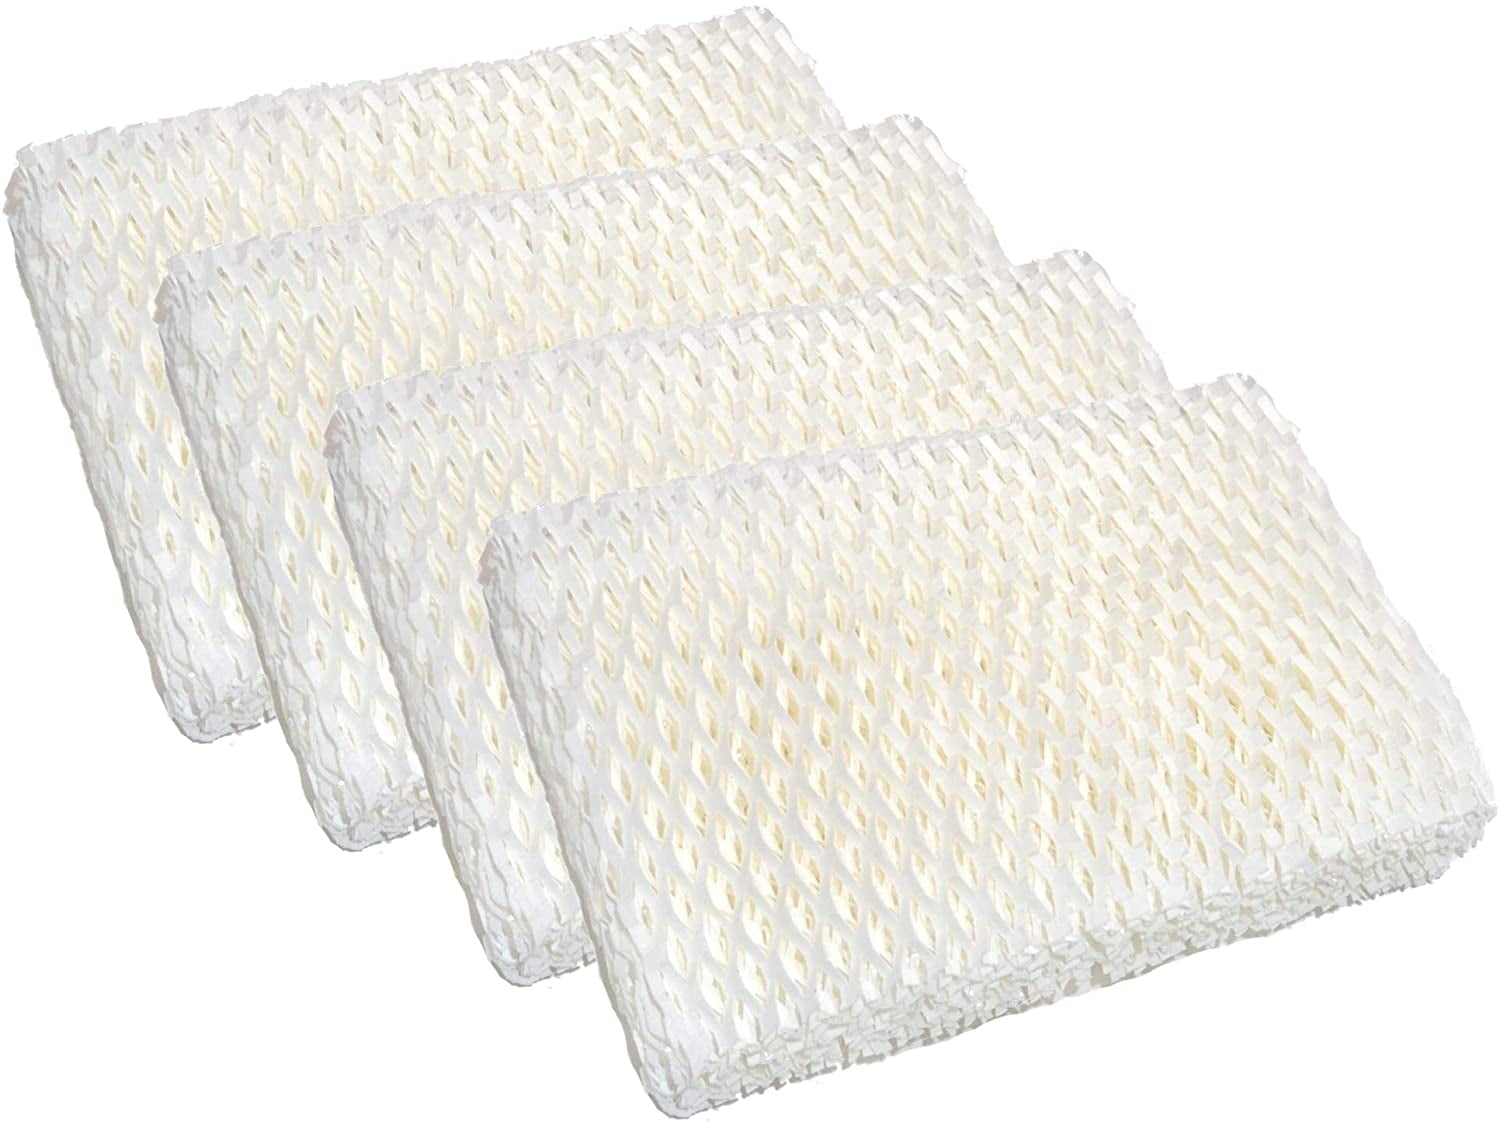 2H01 Replacement Graco 4-Pack HQRP Humidifier Wick Filter for Graco 2H00 Cool Mist 